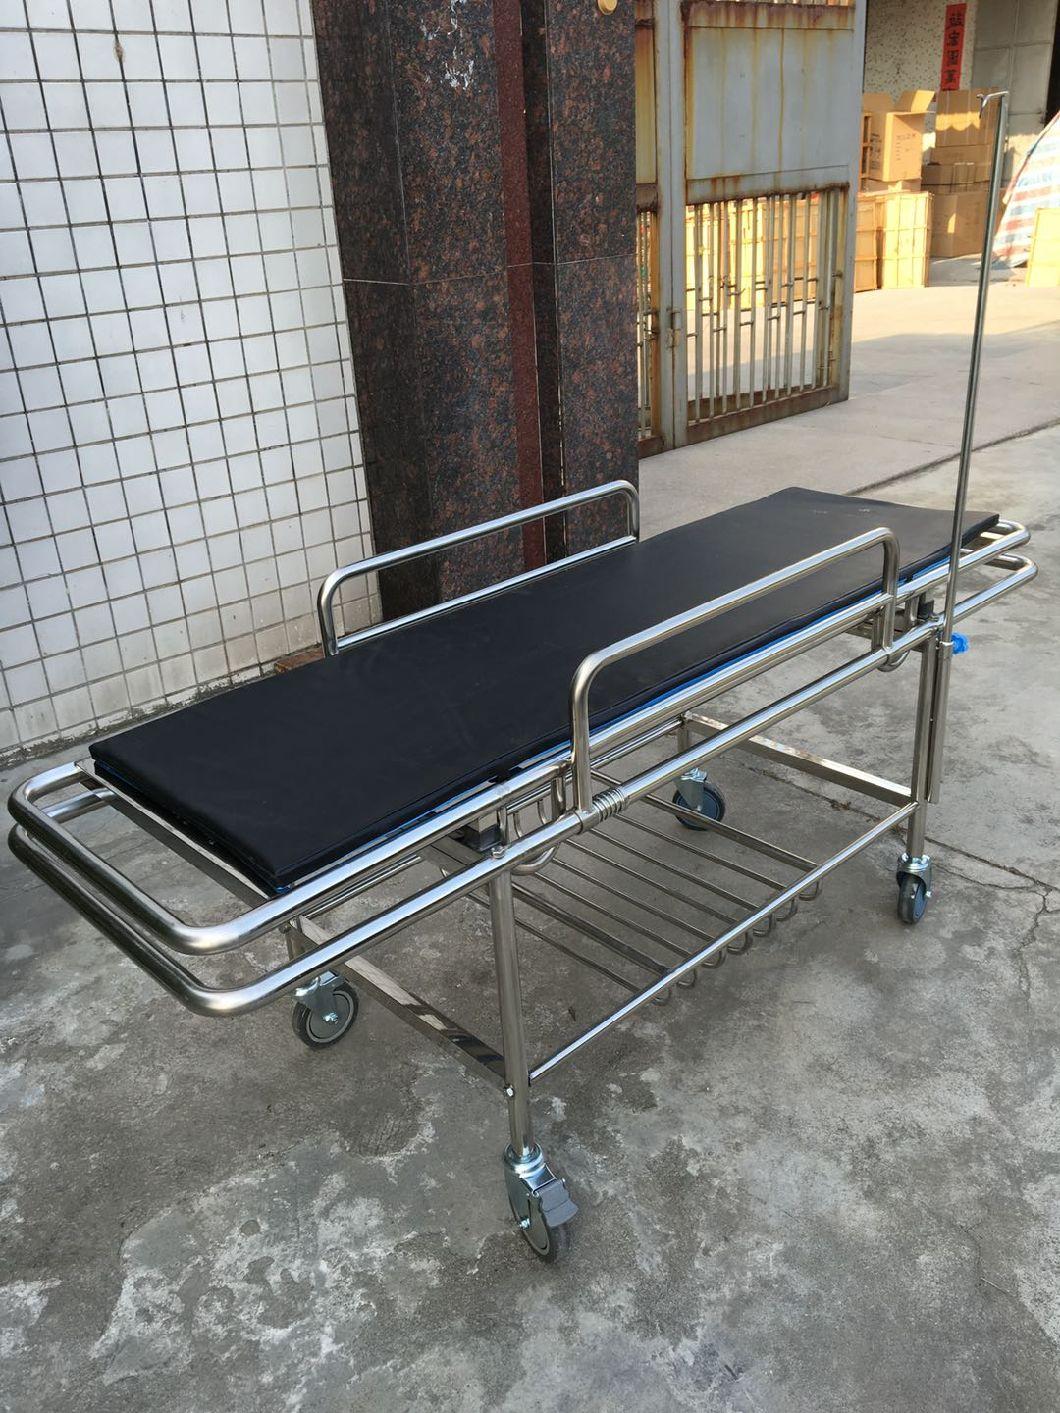 Stainless Steel Stretcher with Four Castors